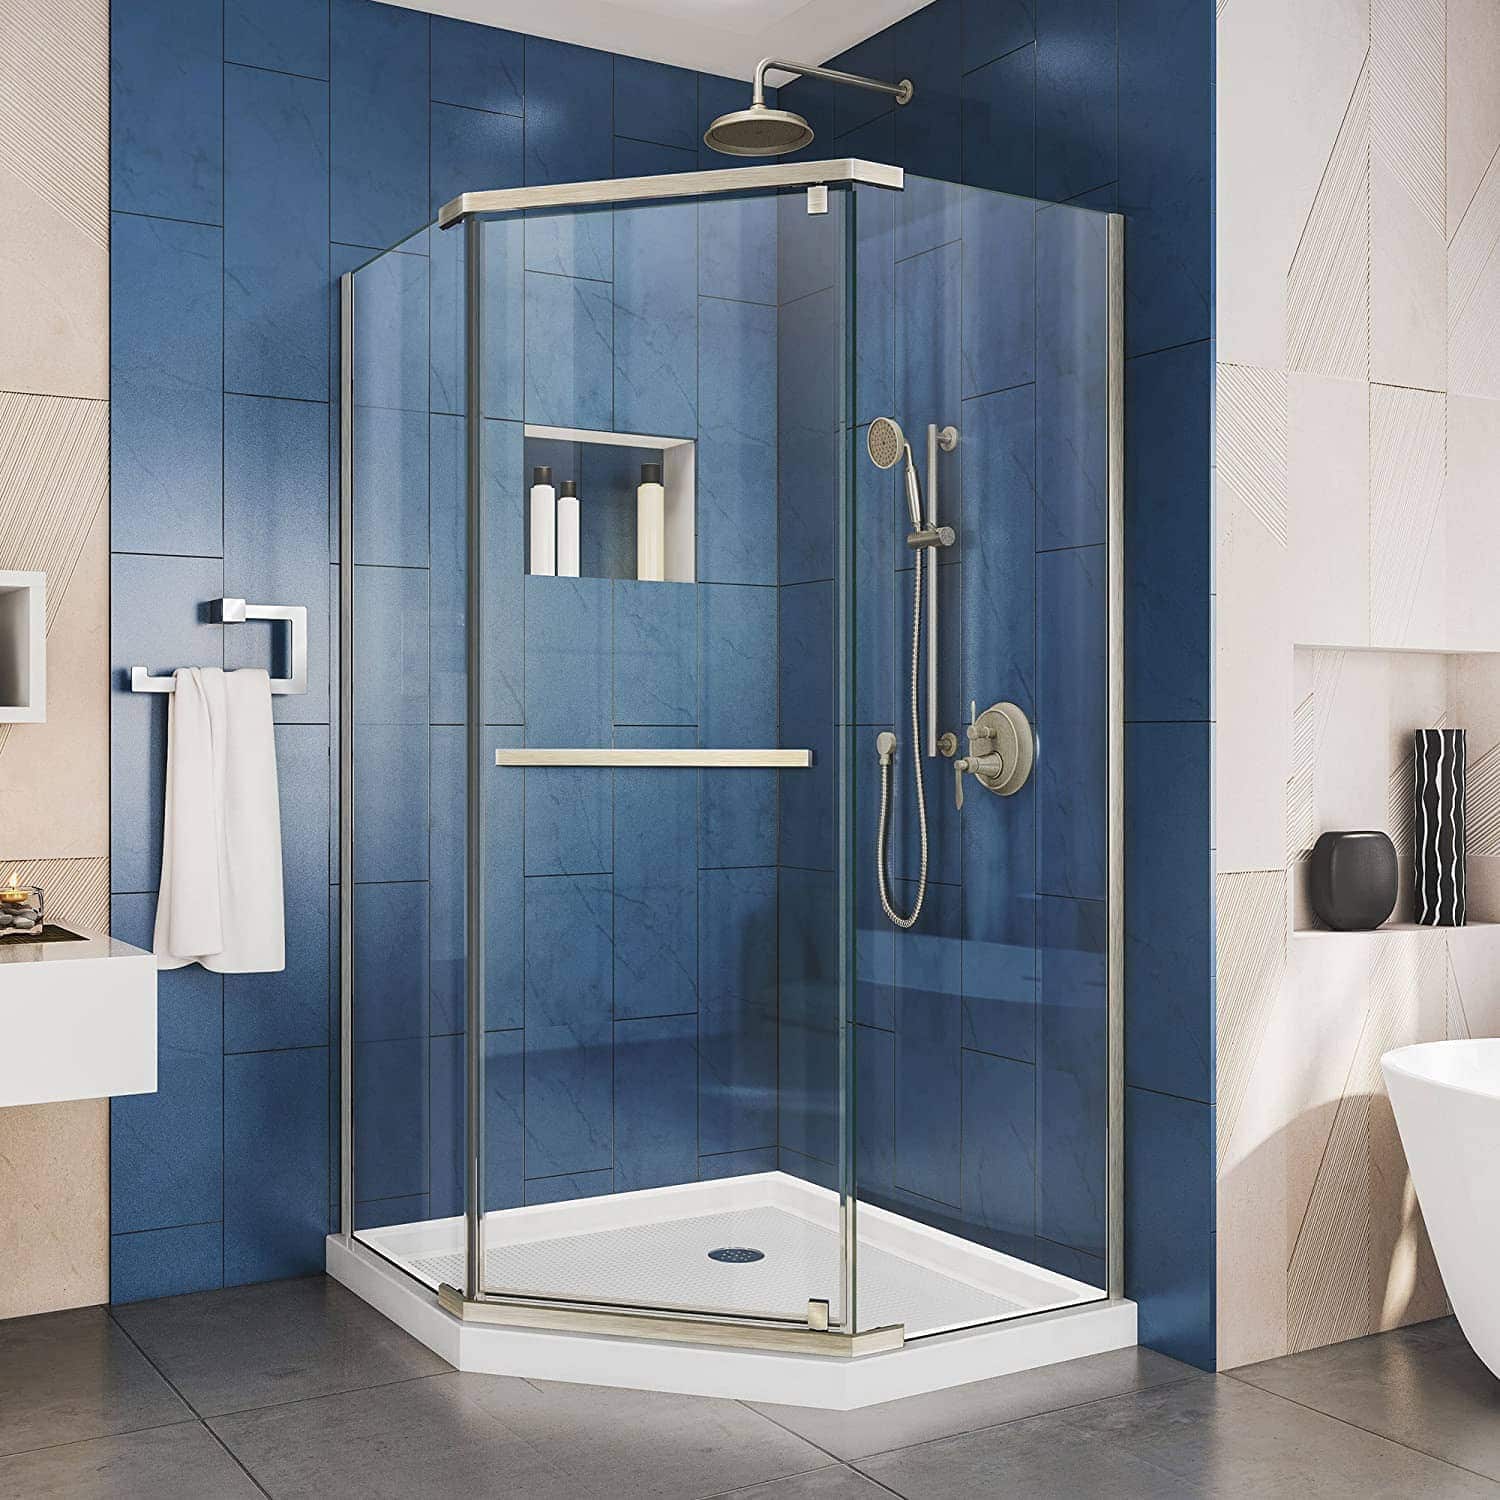 Glass Shower Doors Coral Springs